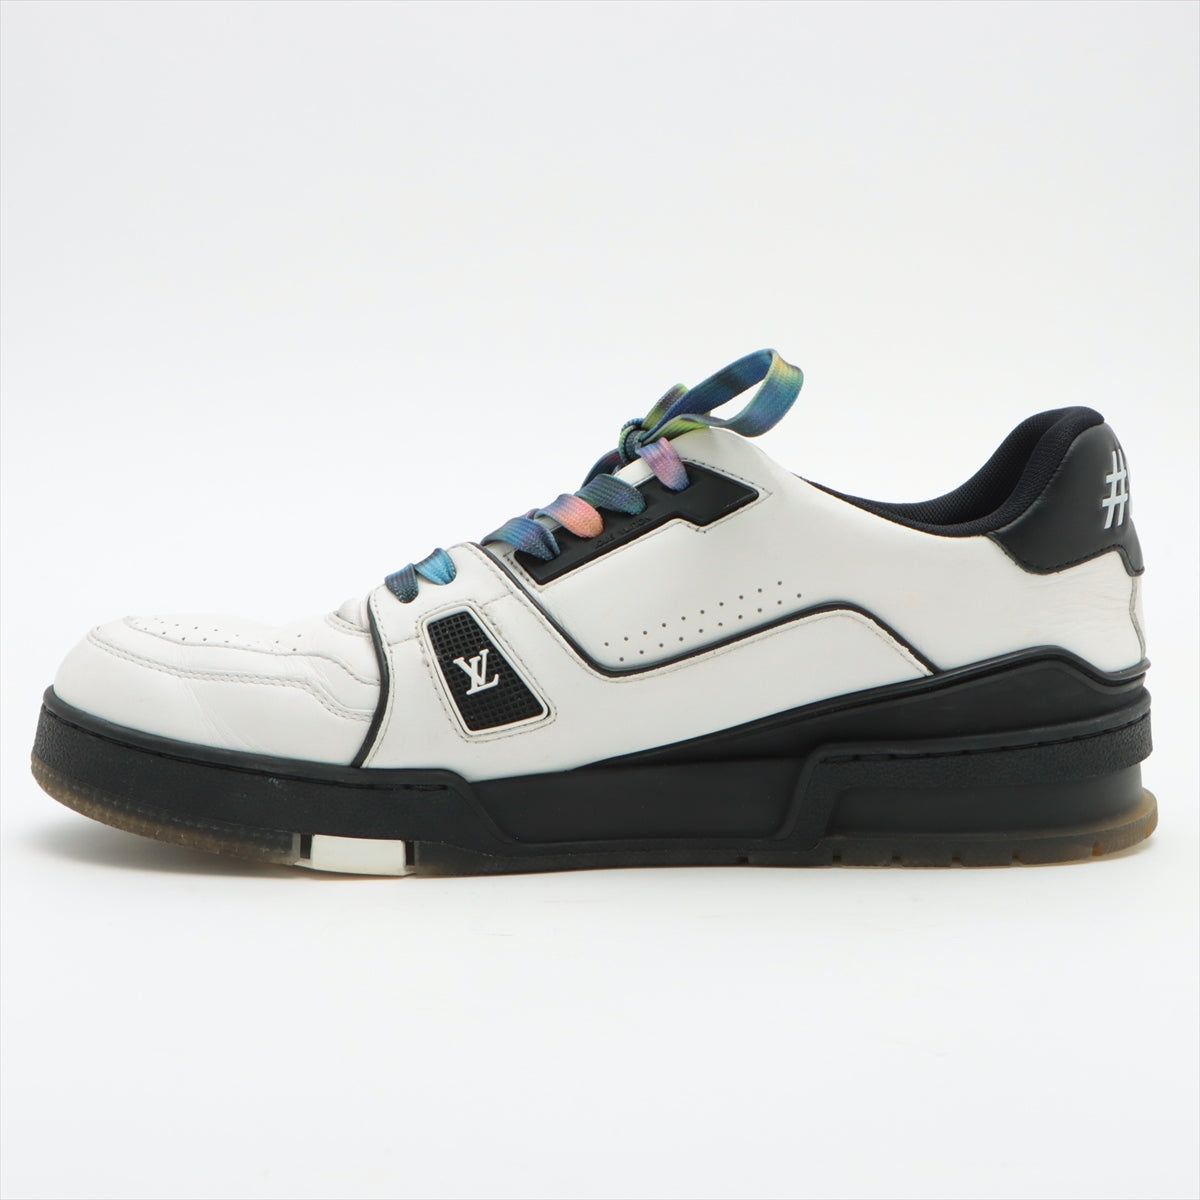 Louis Vuitton LV Trainer Line 21 years Leather Sneakers 8 Men's Black × White GO0261 upper There is dirt on the midsole There is a thread on the inside of the left foot